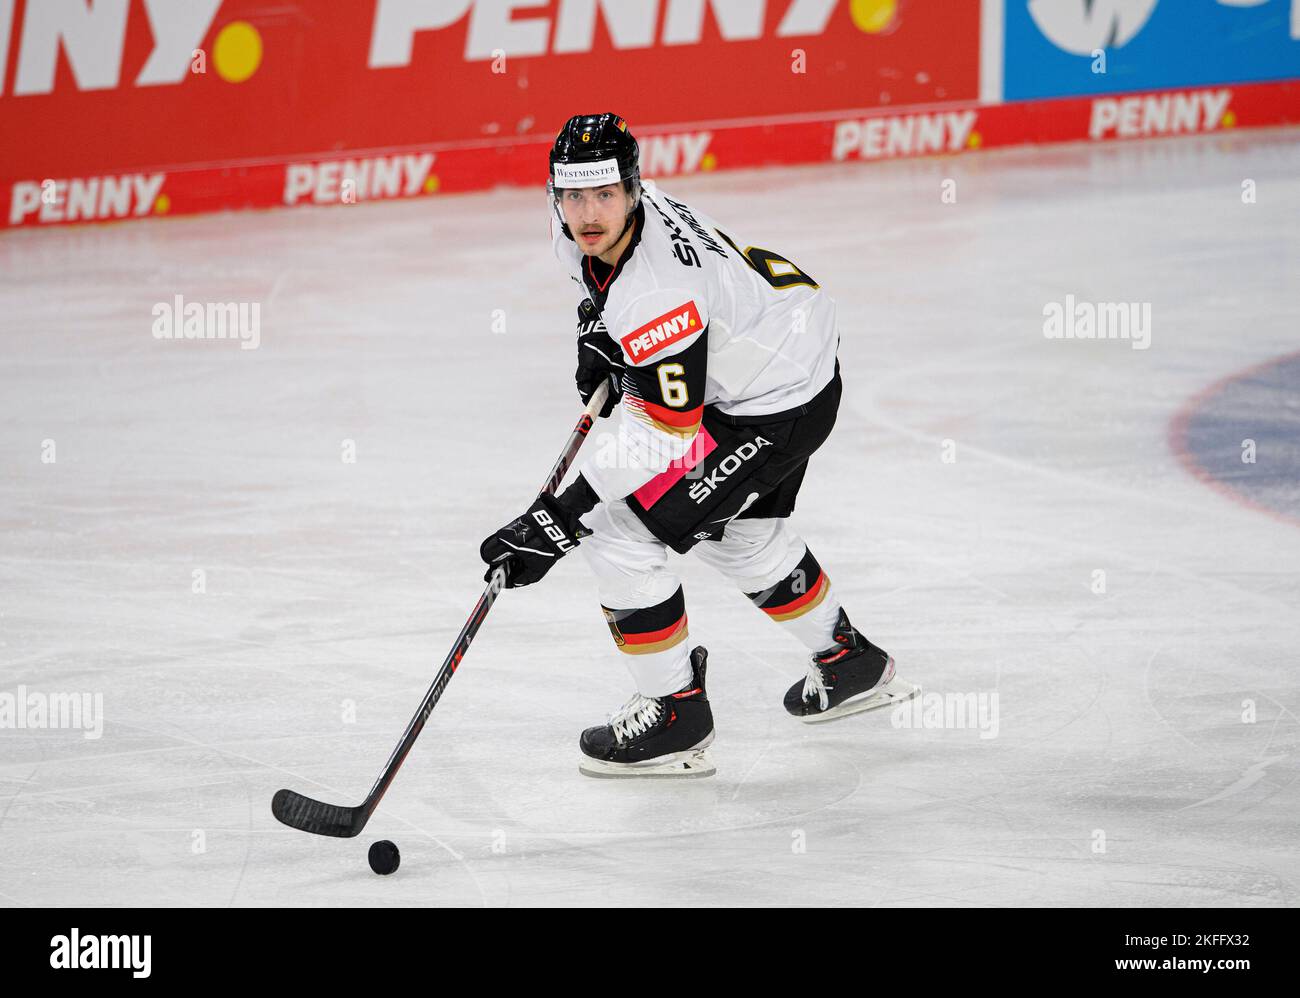 Julius KARRER (GER) Action, Germany (GER) - Slovakia (SVK), on 11/13/2021. Ice Hockey Germany Cup from 10.11. - 13.11.2022 in Krefeld/ Germany. Stock Photo